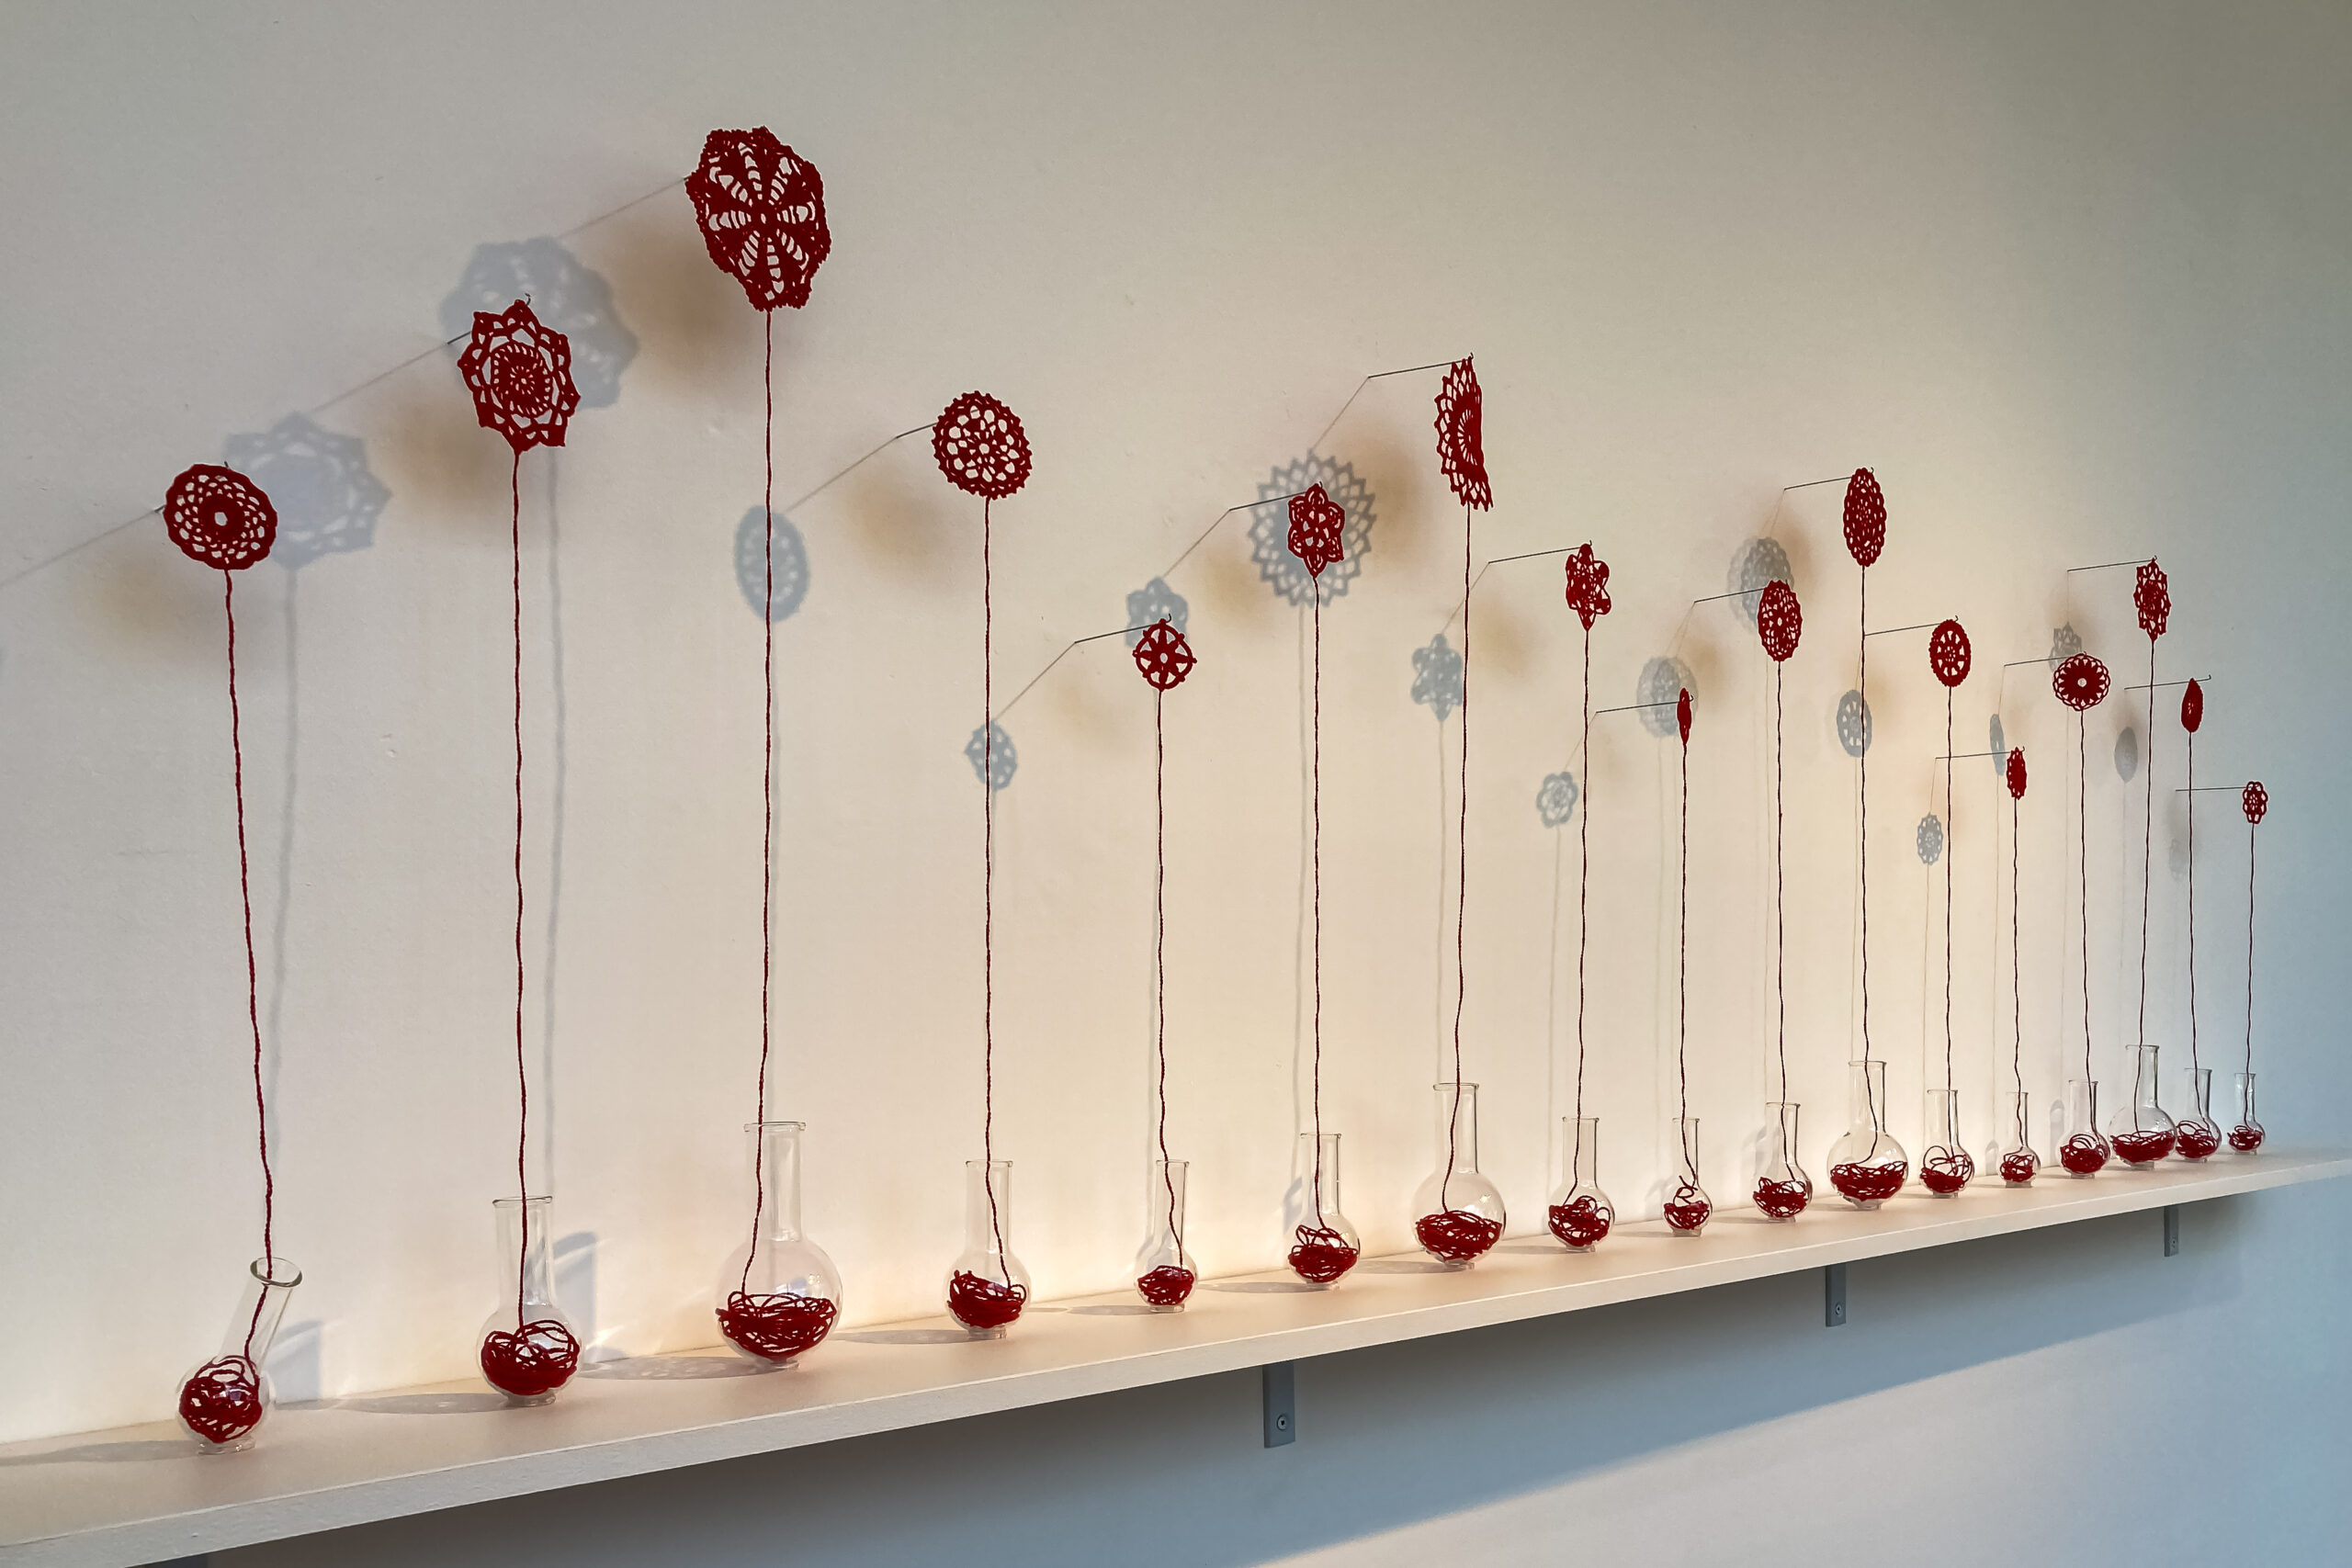 Crocheted red flowers rise from the stems of round bottomed flasks